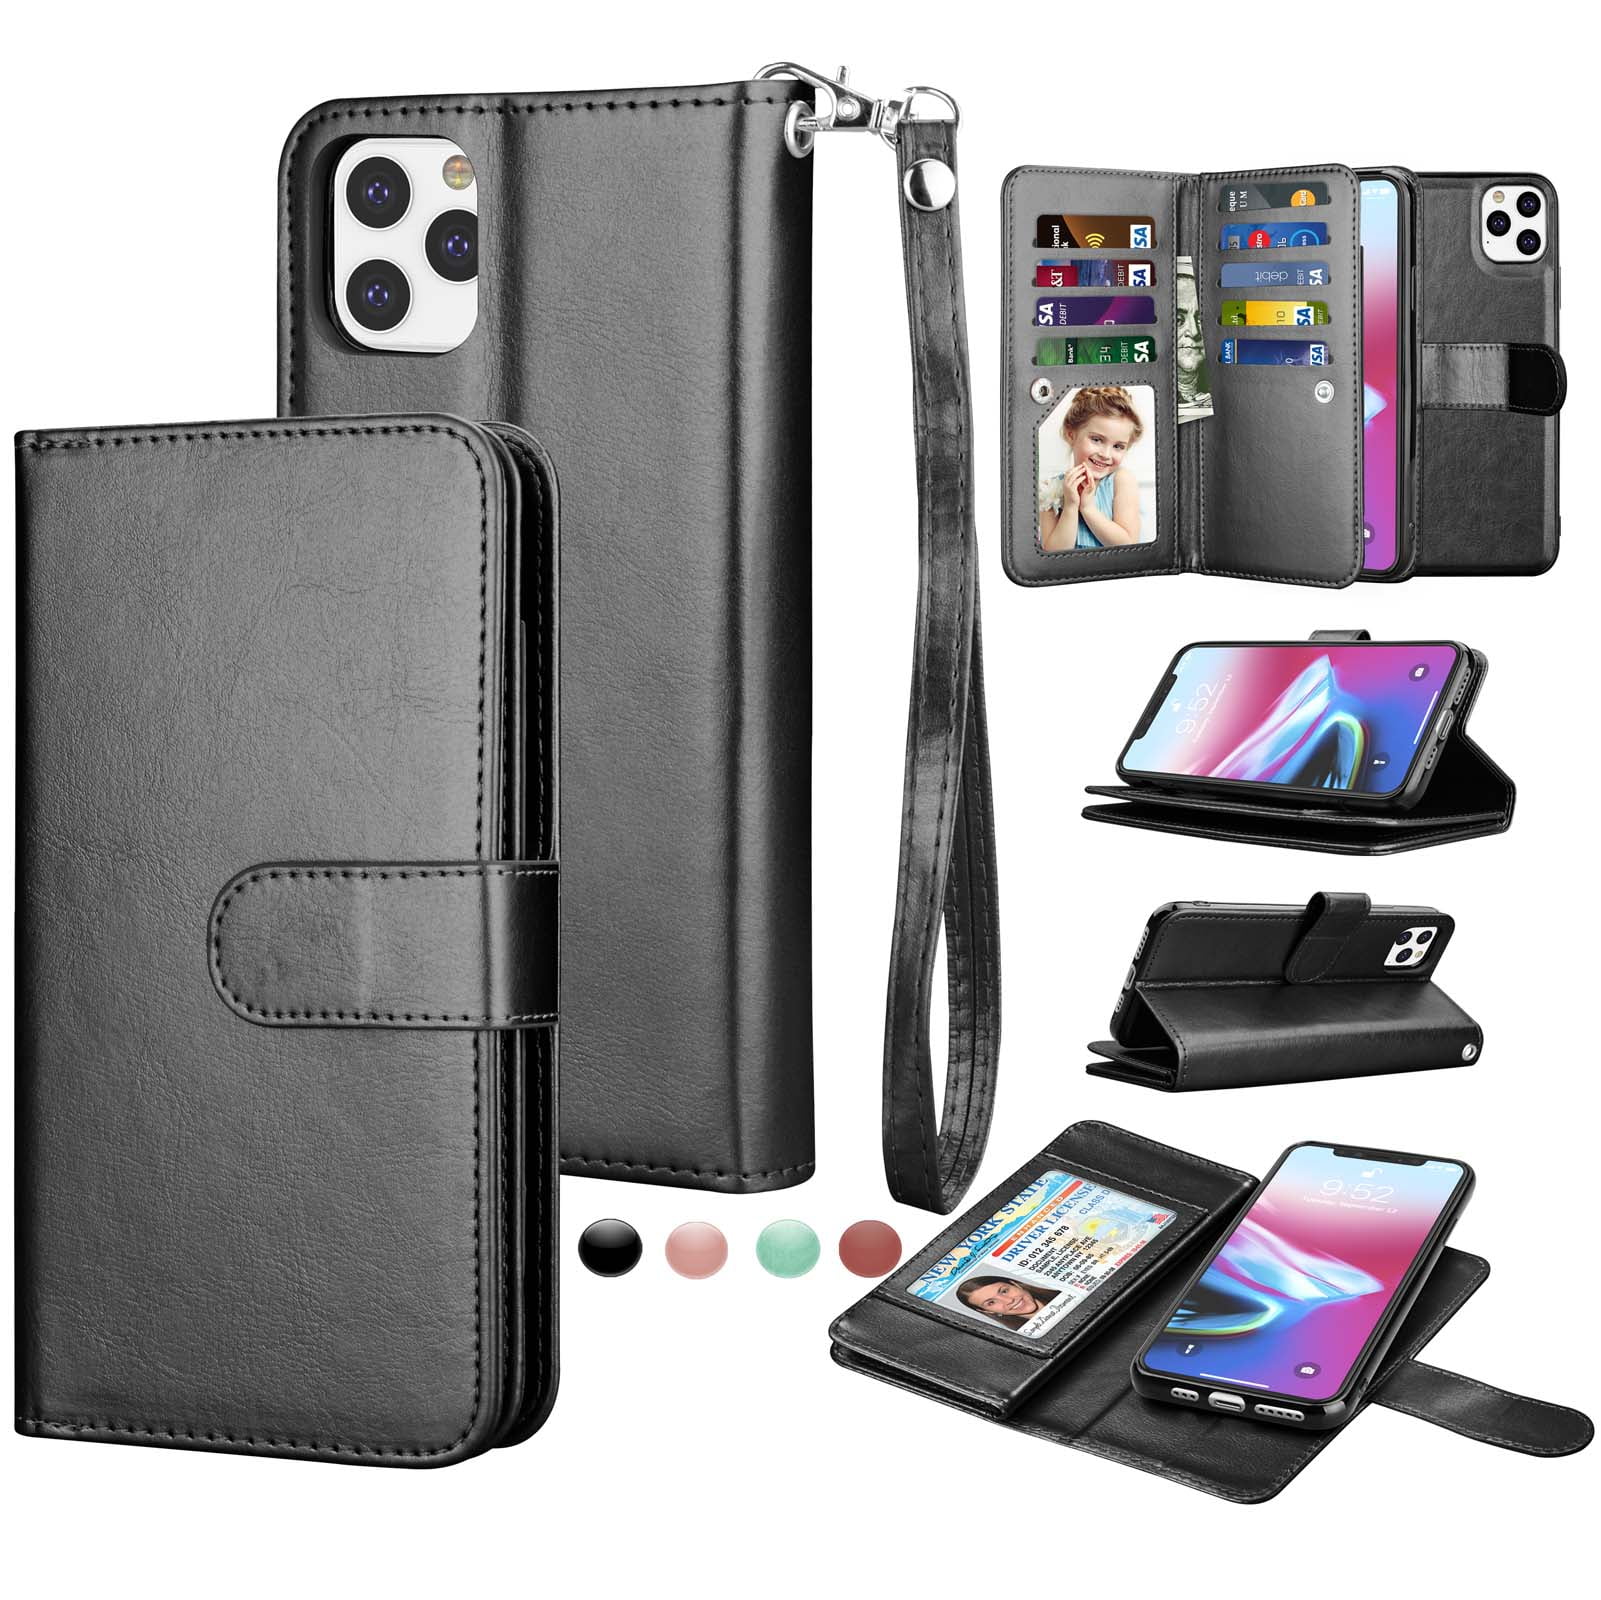 Leather Flip Case Fit for iPhone 11 Pro Max cat Wallet Cover for iPhone 11 Pro Max 